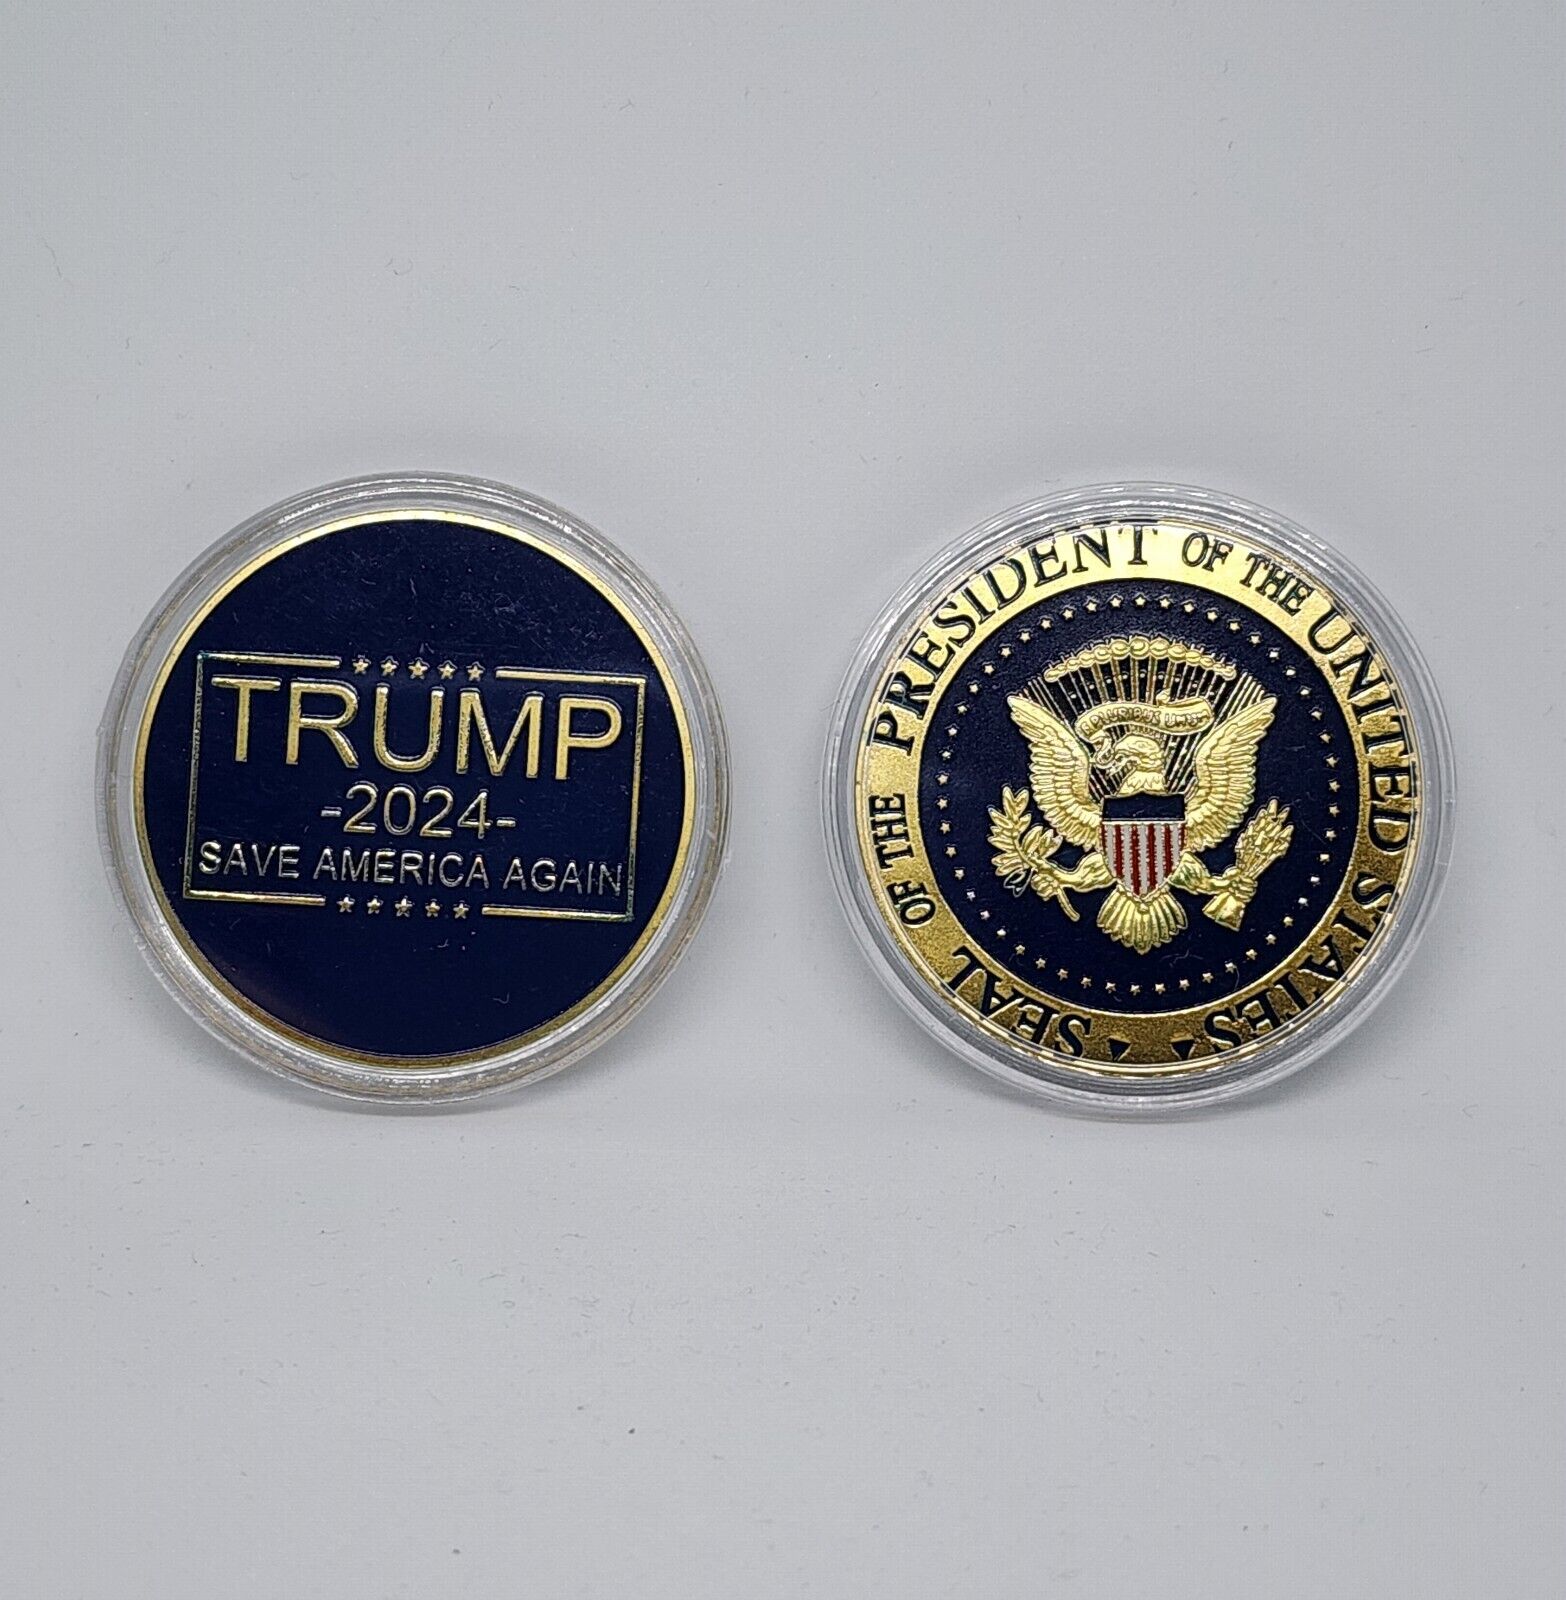 Trump 2024 Save America Again Seal President United States USA Coin GOLD